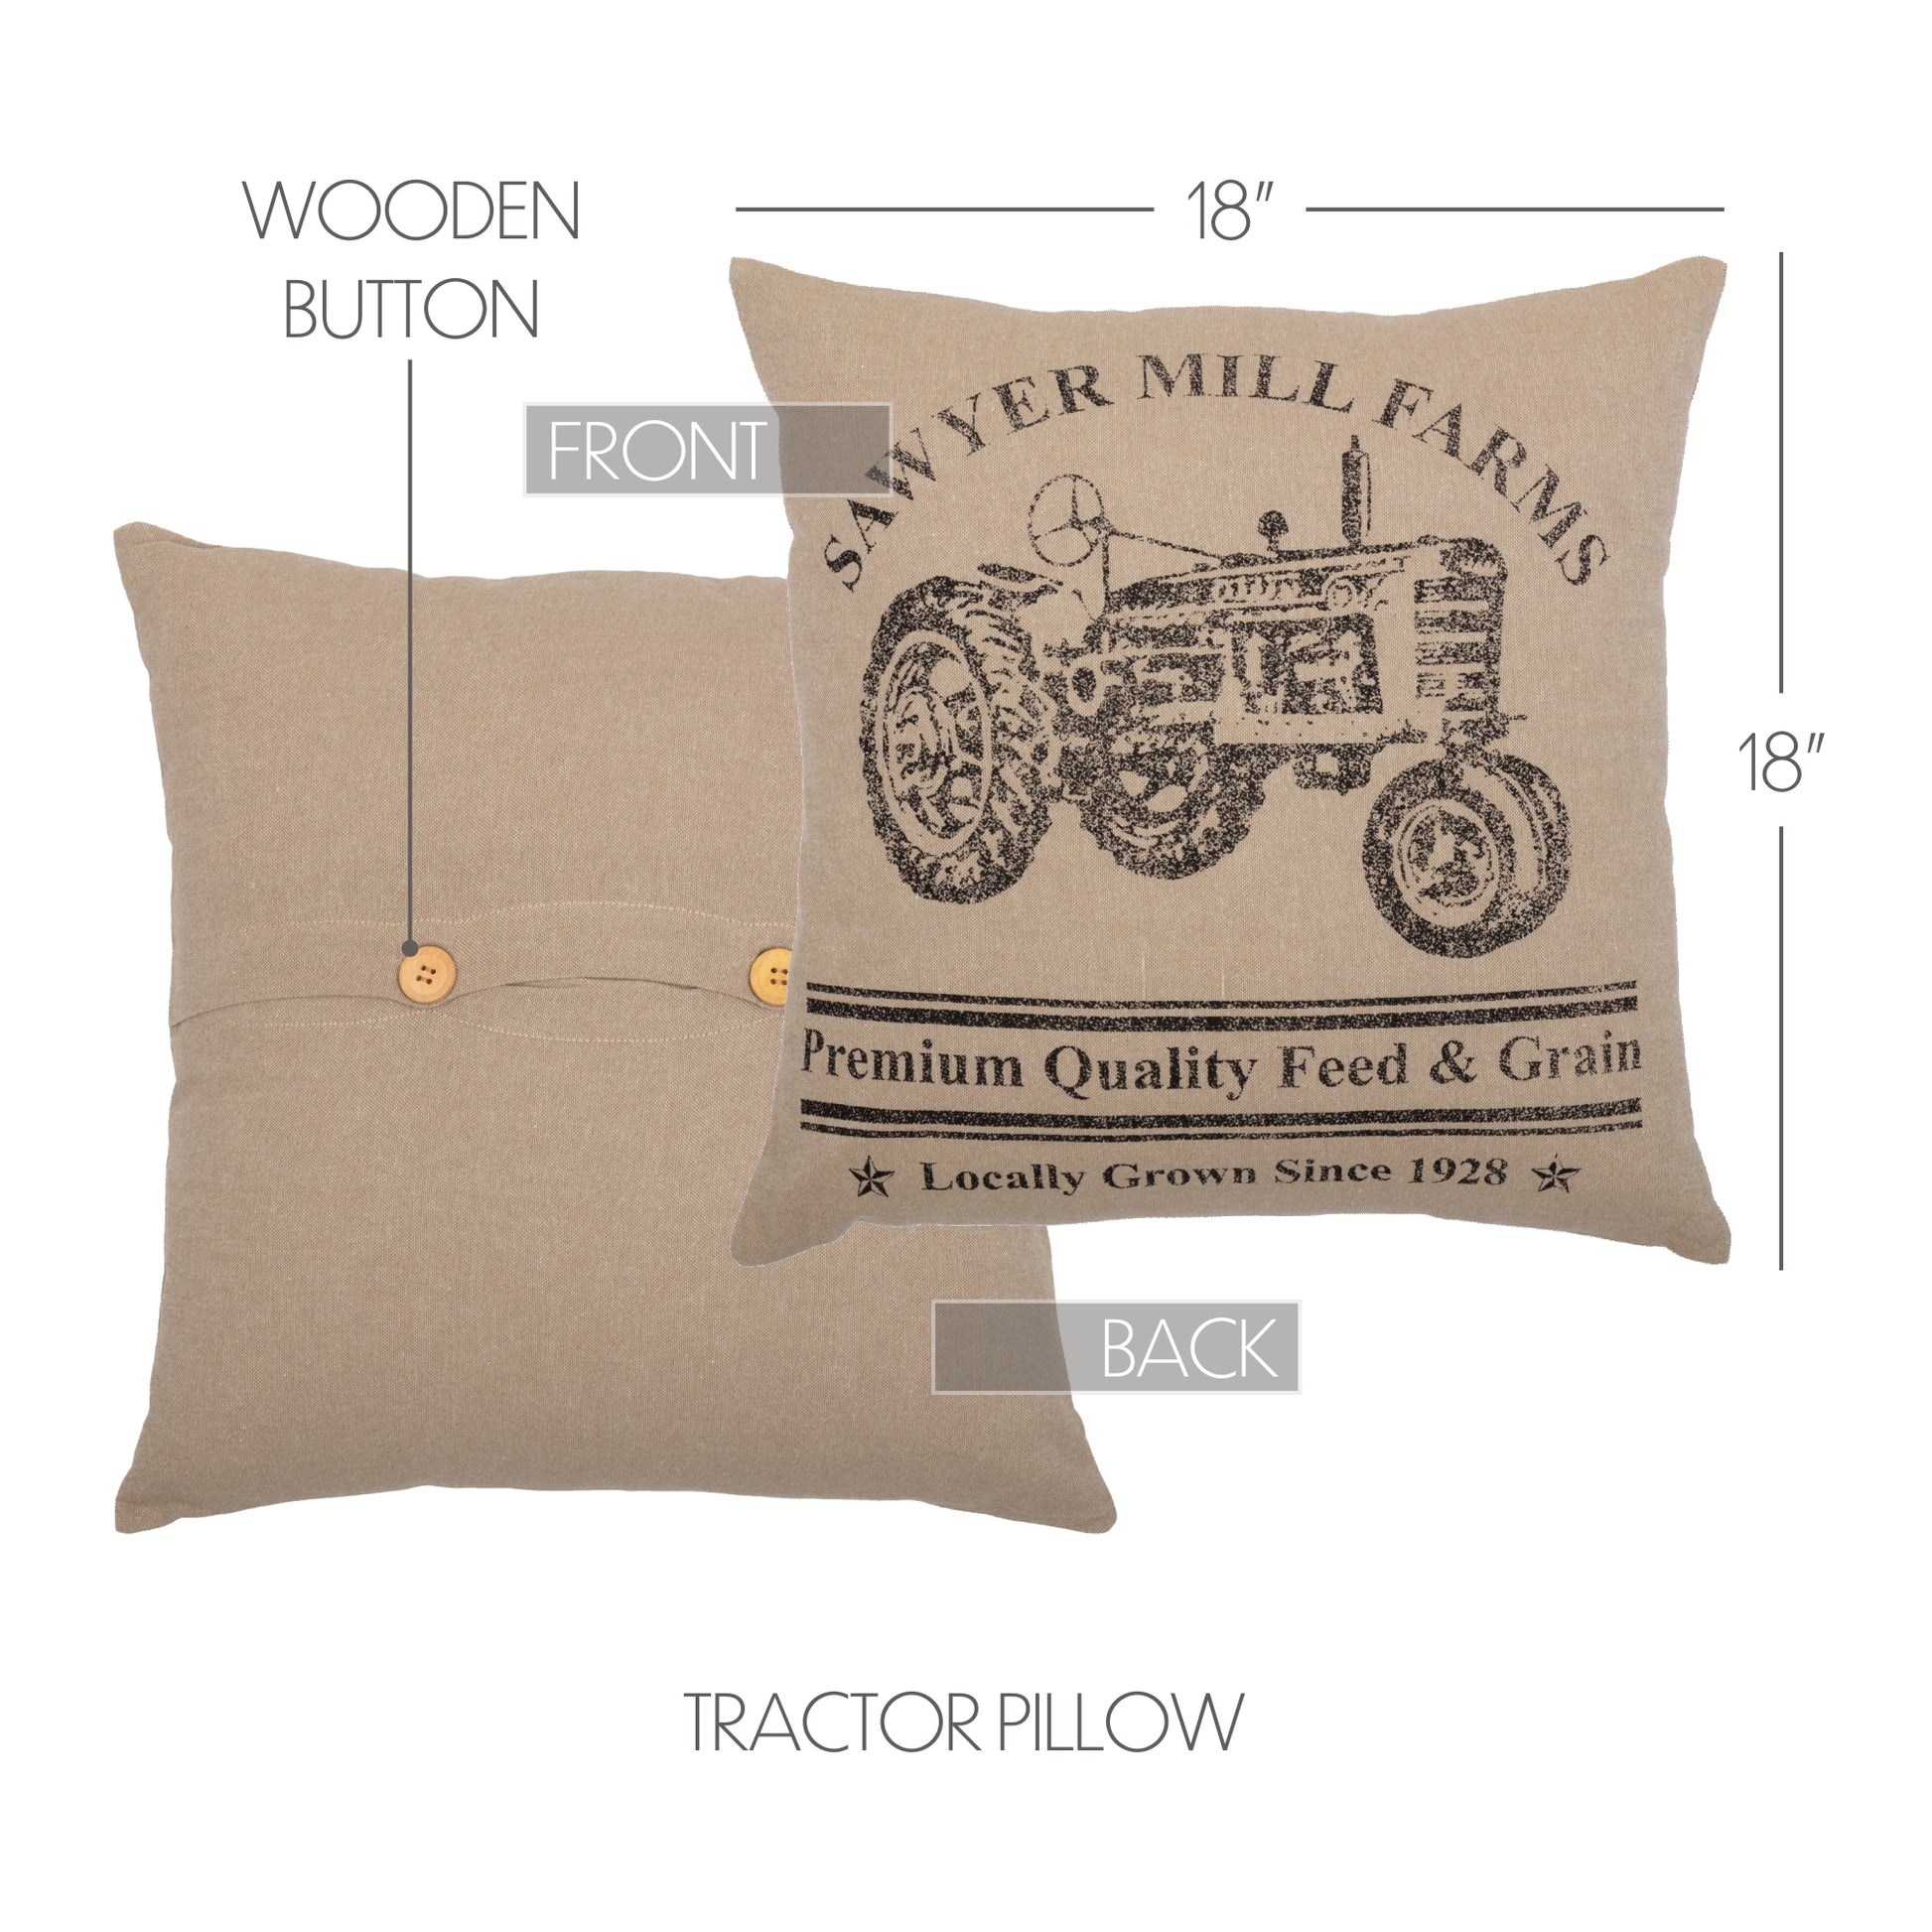 51300-Sawyer-Mill-Charcoal-Tractor-Pillow-18x18-image-1